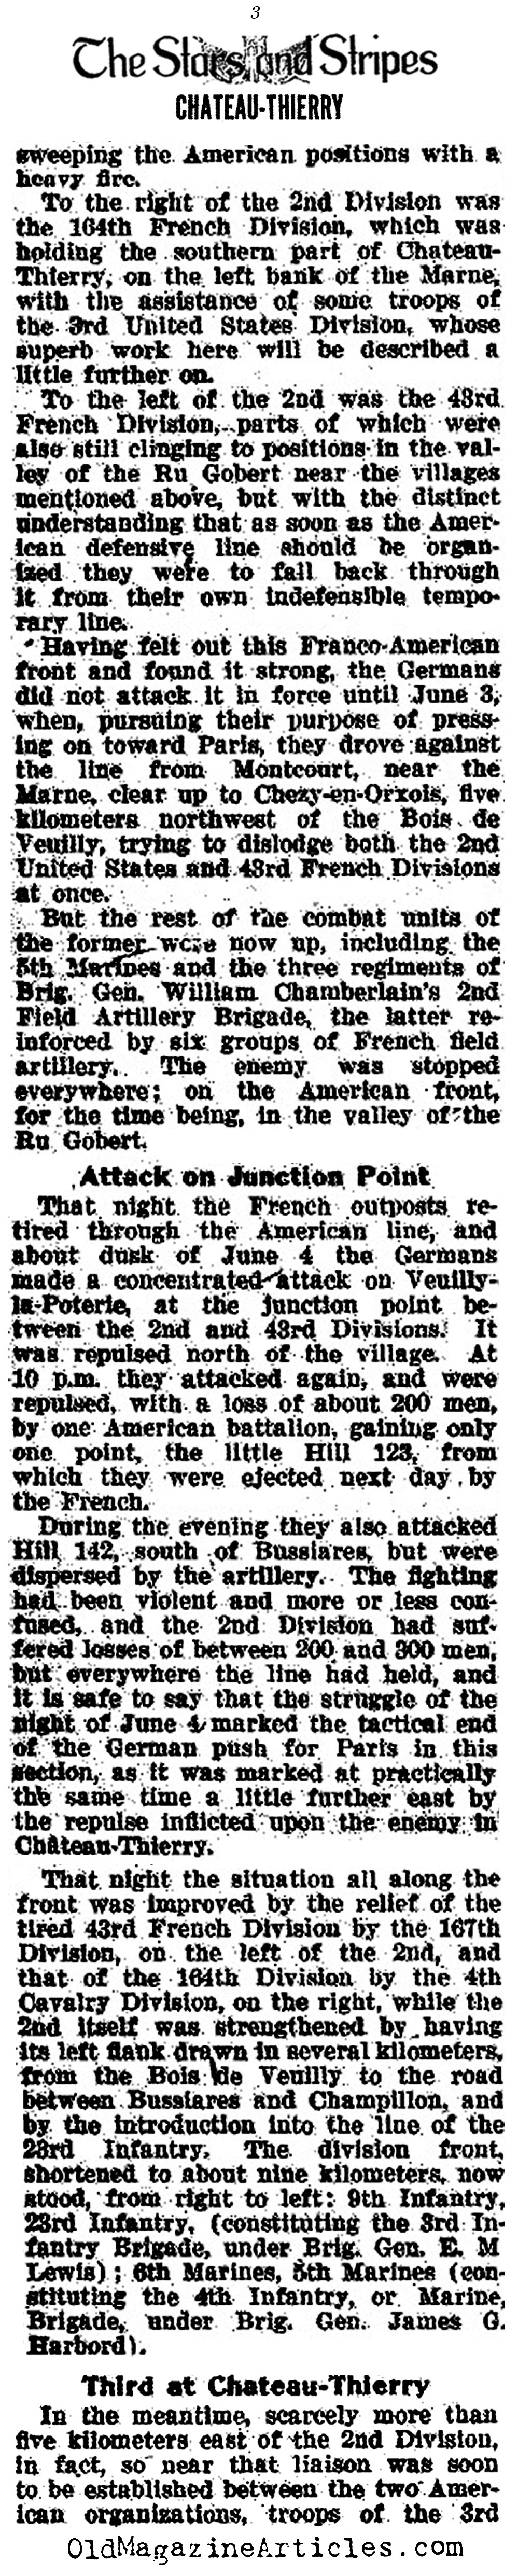 Yanks on the Marne: The Battle of Chateau-Thierry (The Stars and Stripes, 1918)